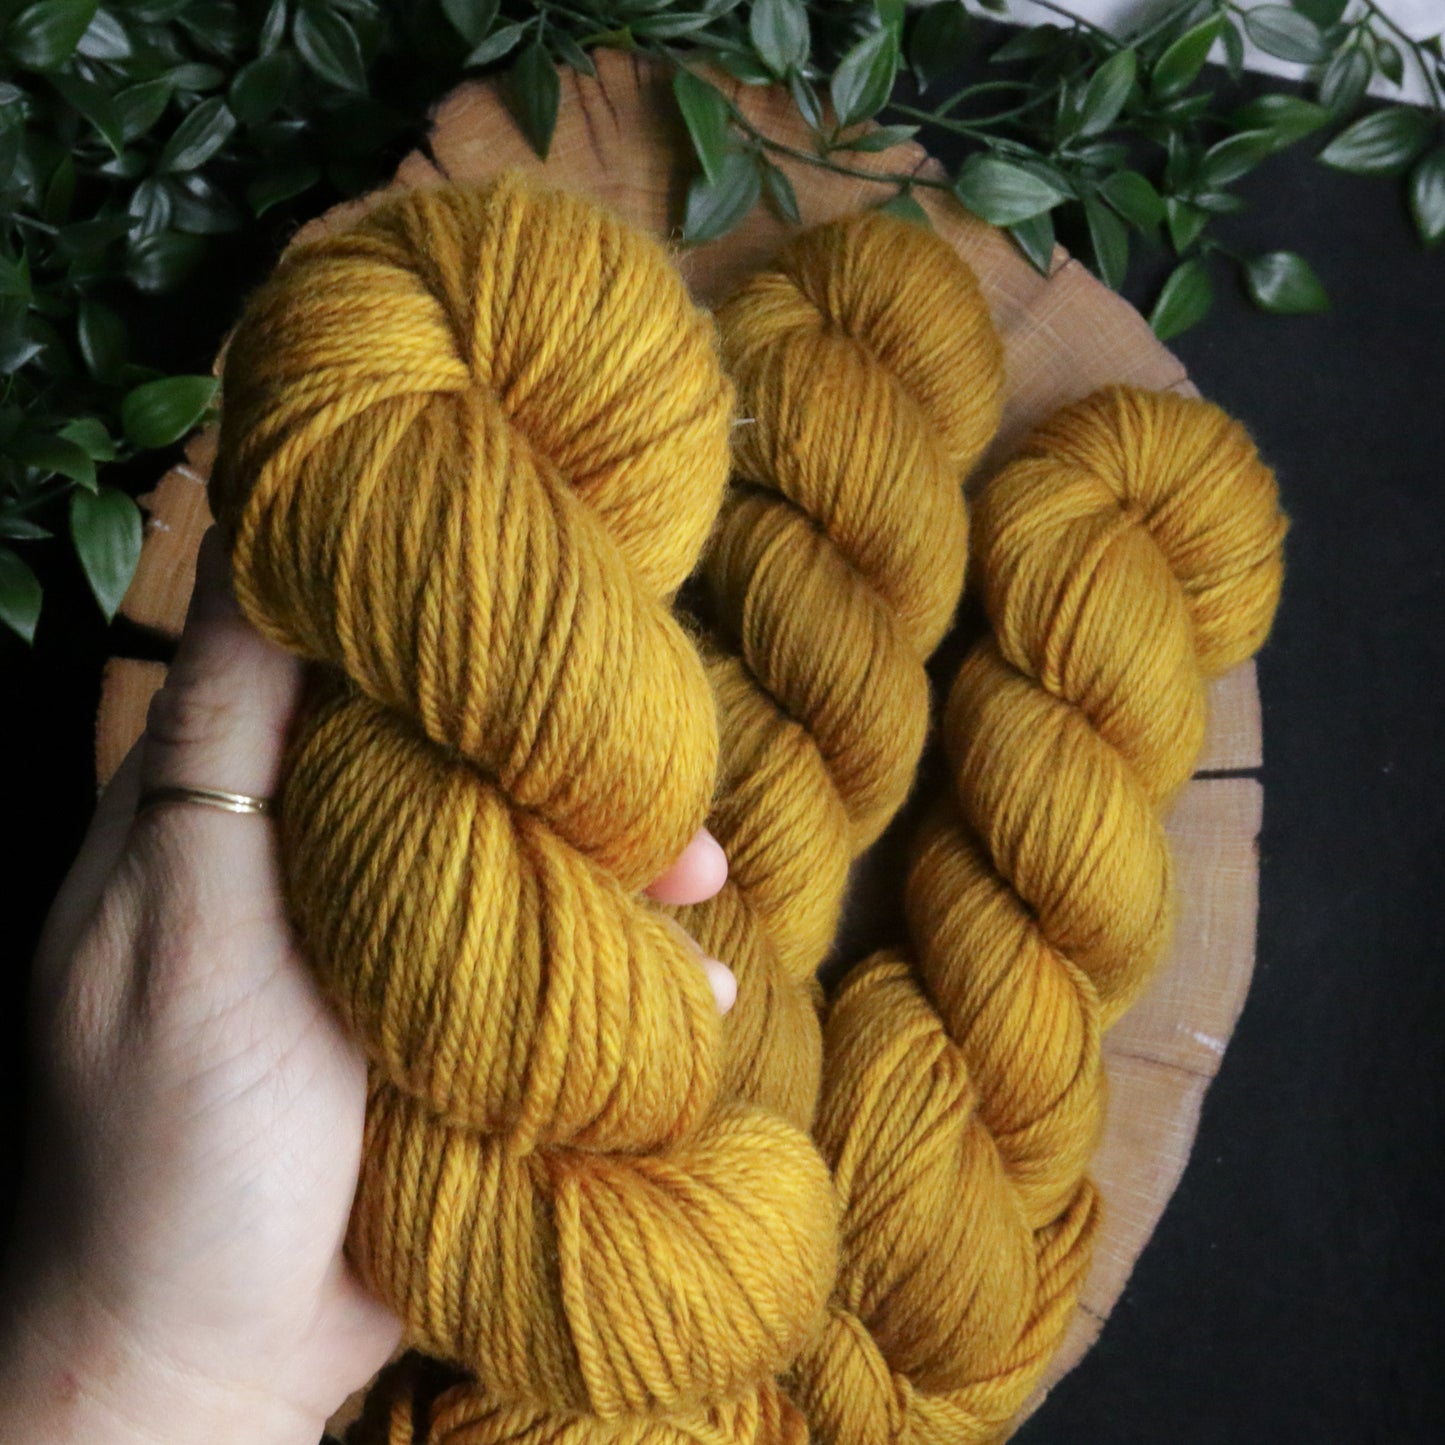 Baltic Amber - Sweater Quantity and Dyed to Order